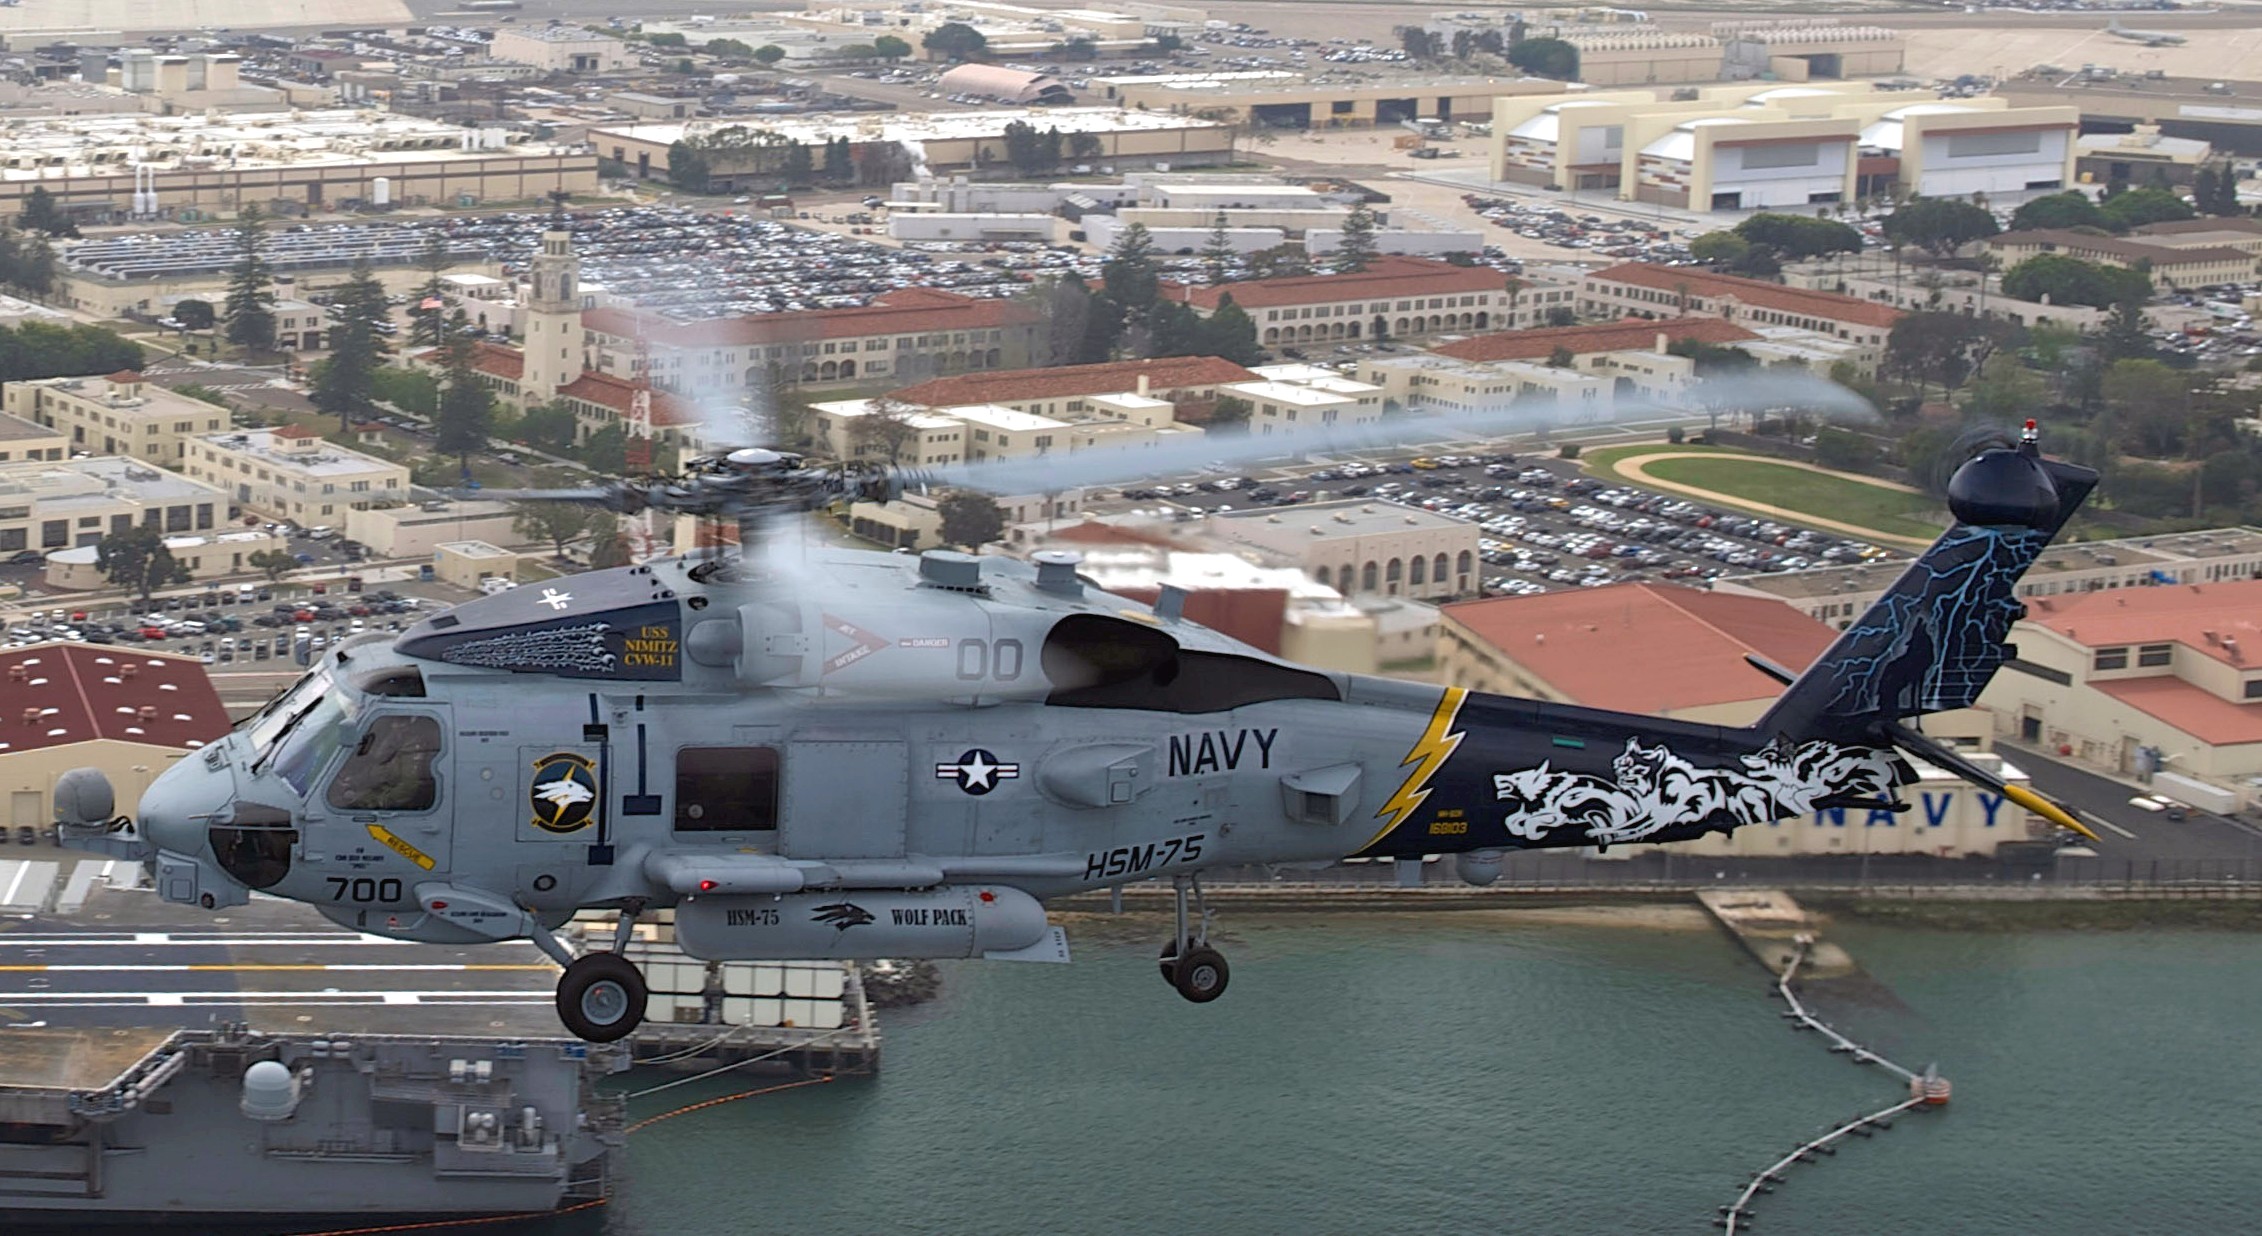 hsm-75 wolfpack helicopter maritime strike squadron us navy mh-60r seahawk 2016 15 nas north island san diego california